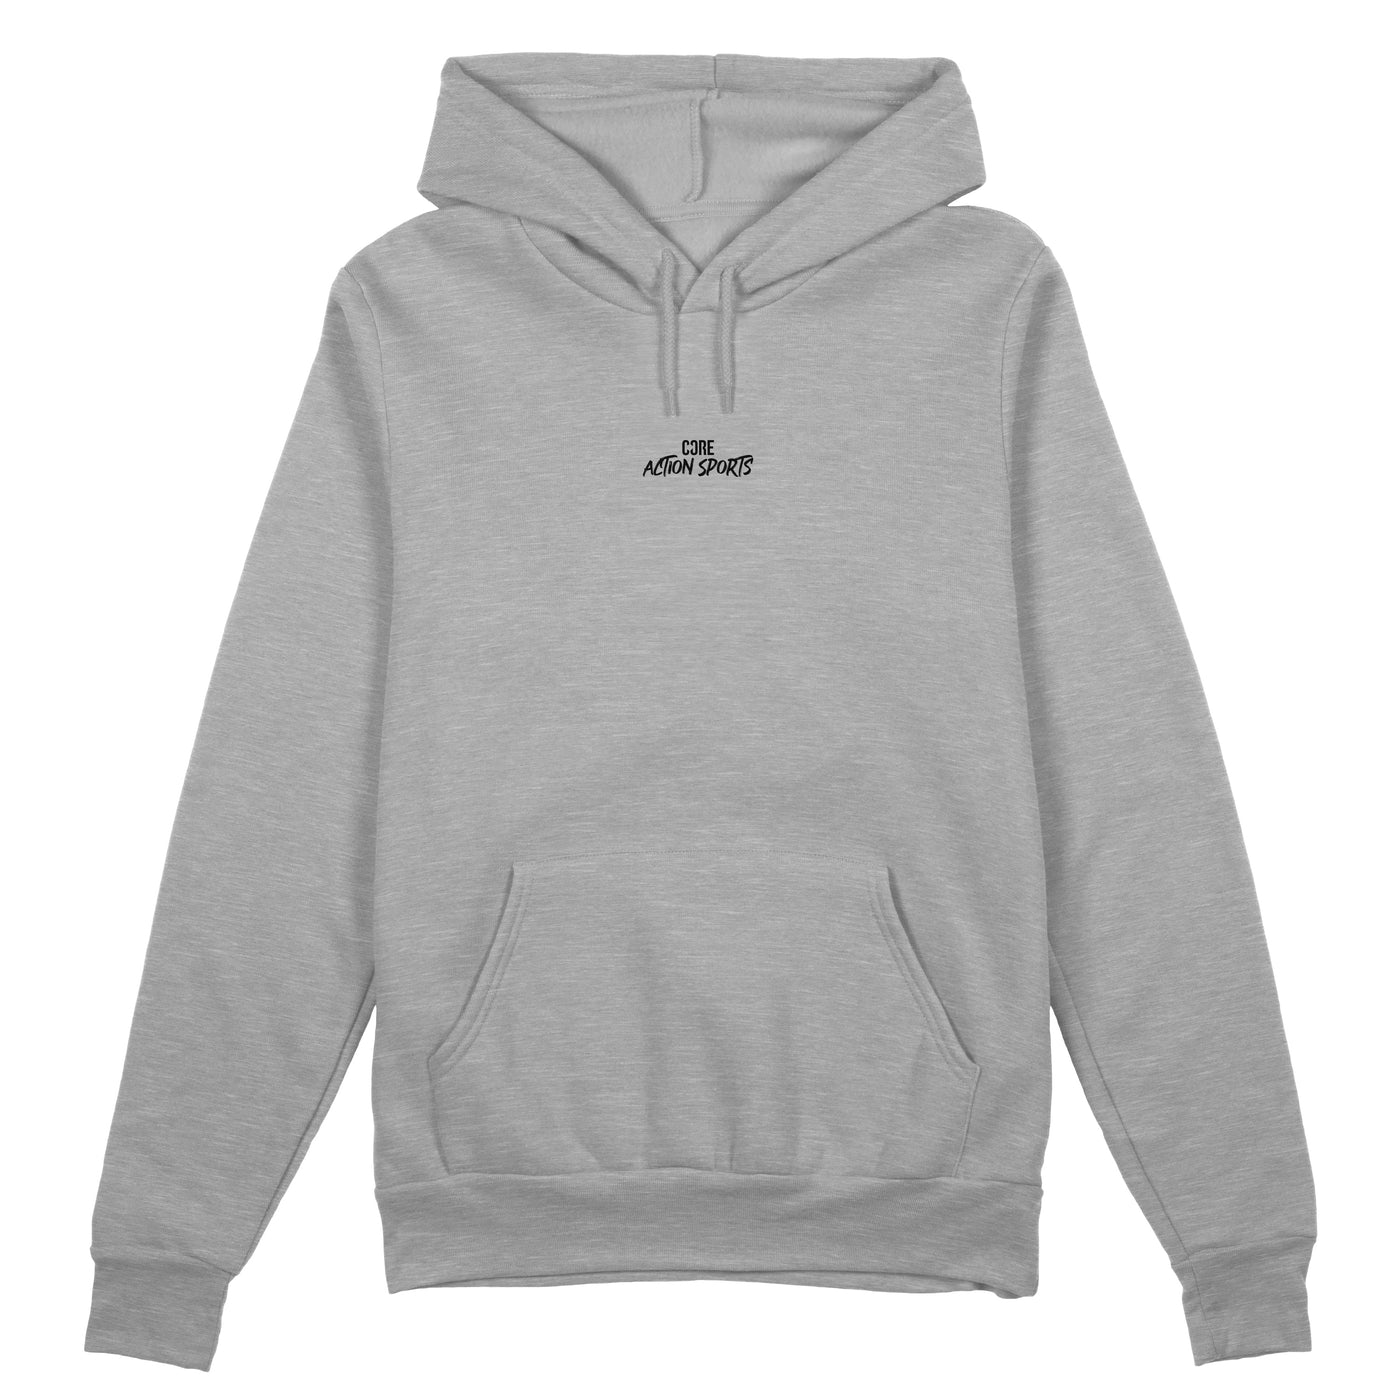 CORE Action Sports Hoodie – Grey/Black